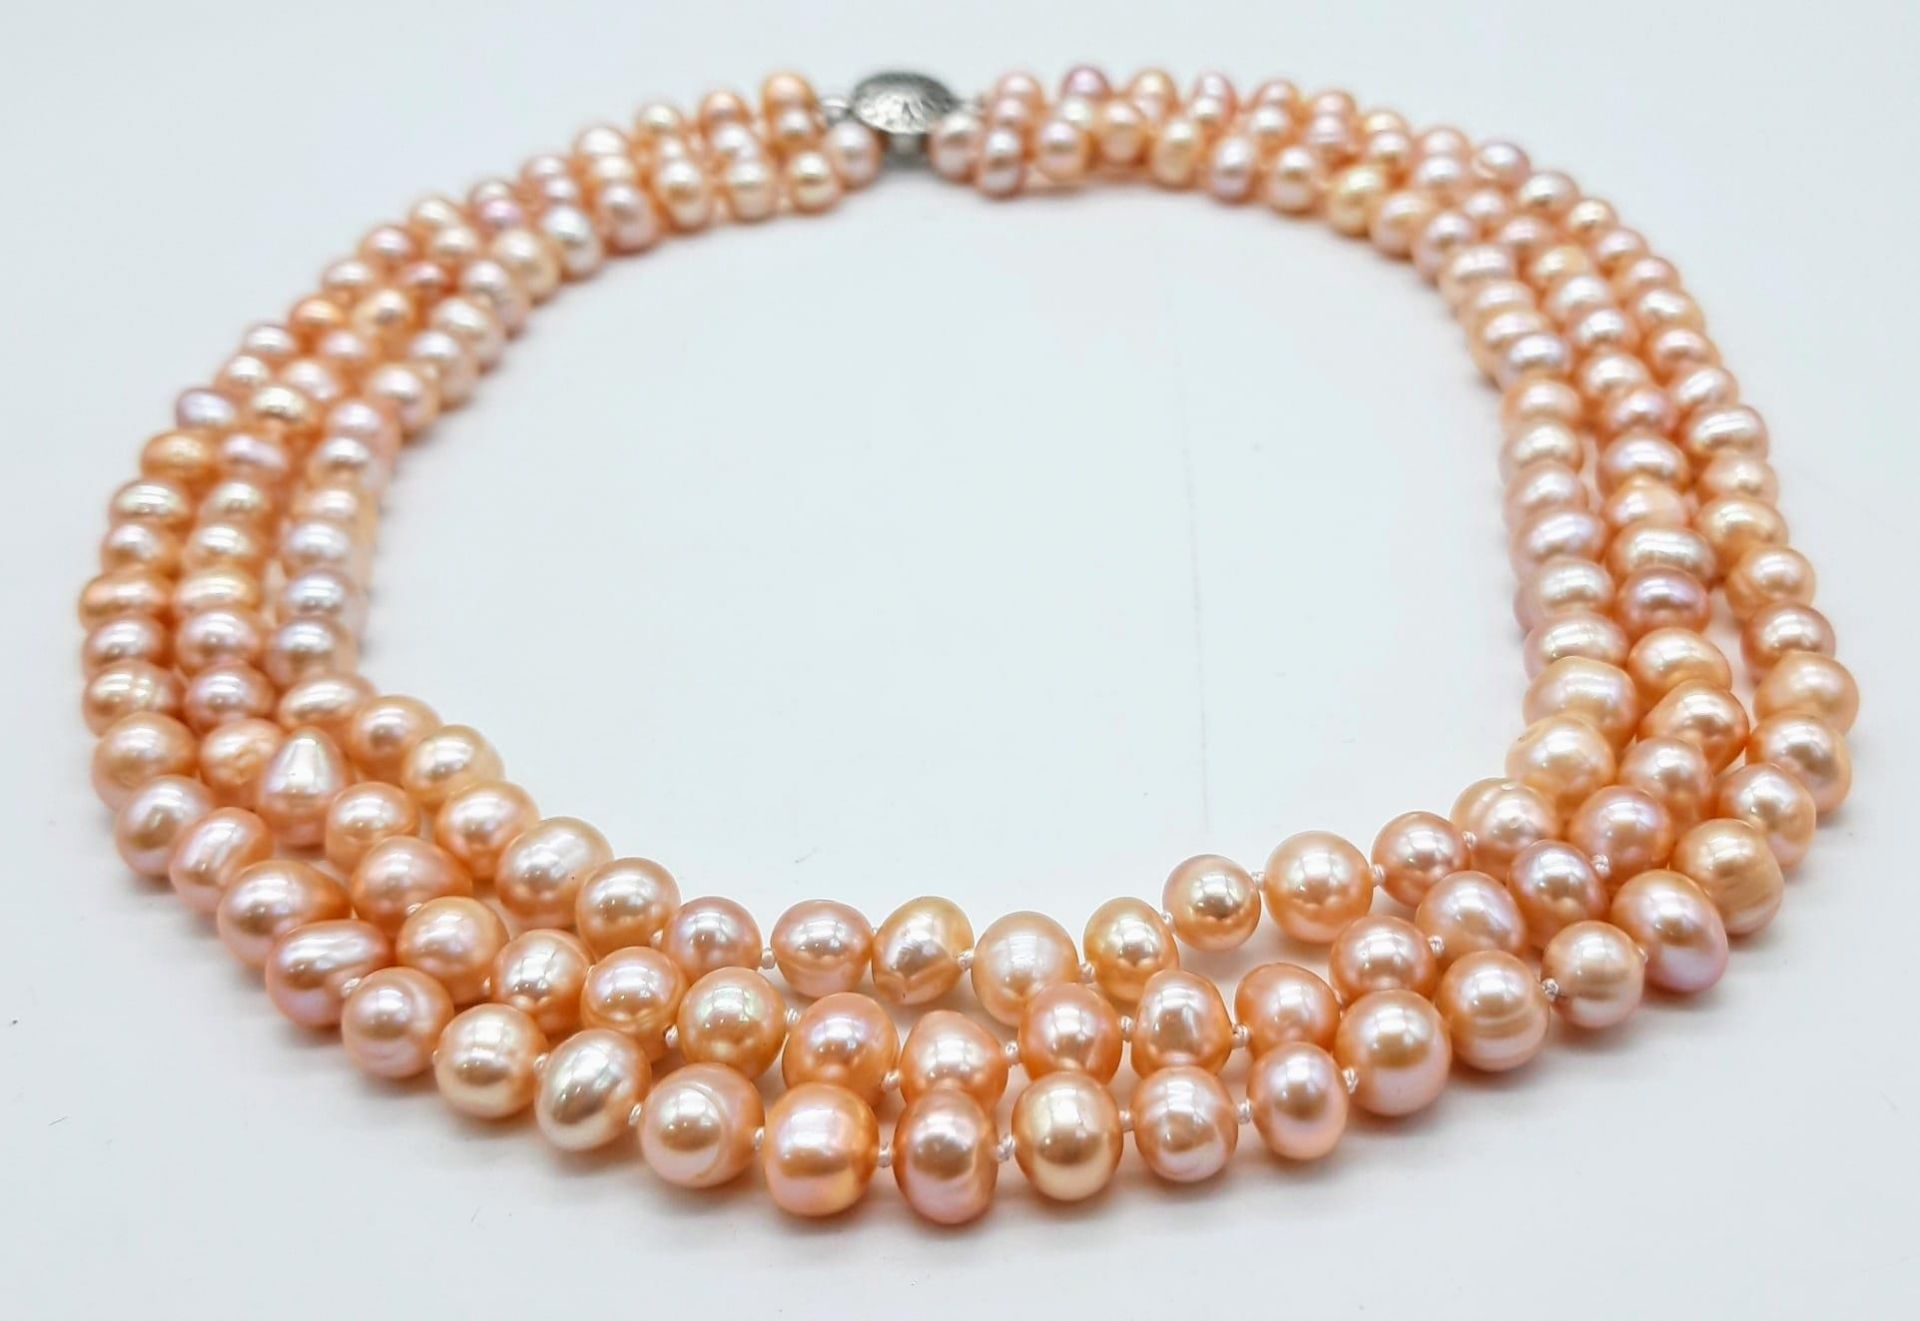 A fashionable three strand of high quality, natural pink pearls necklace, bracelet and earrings - Image 2 of 6